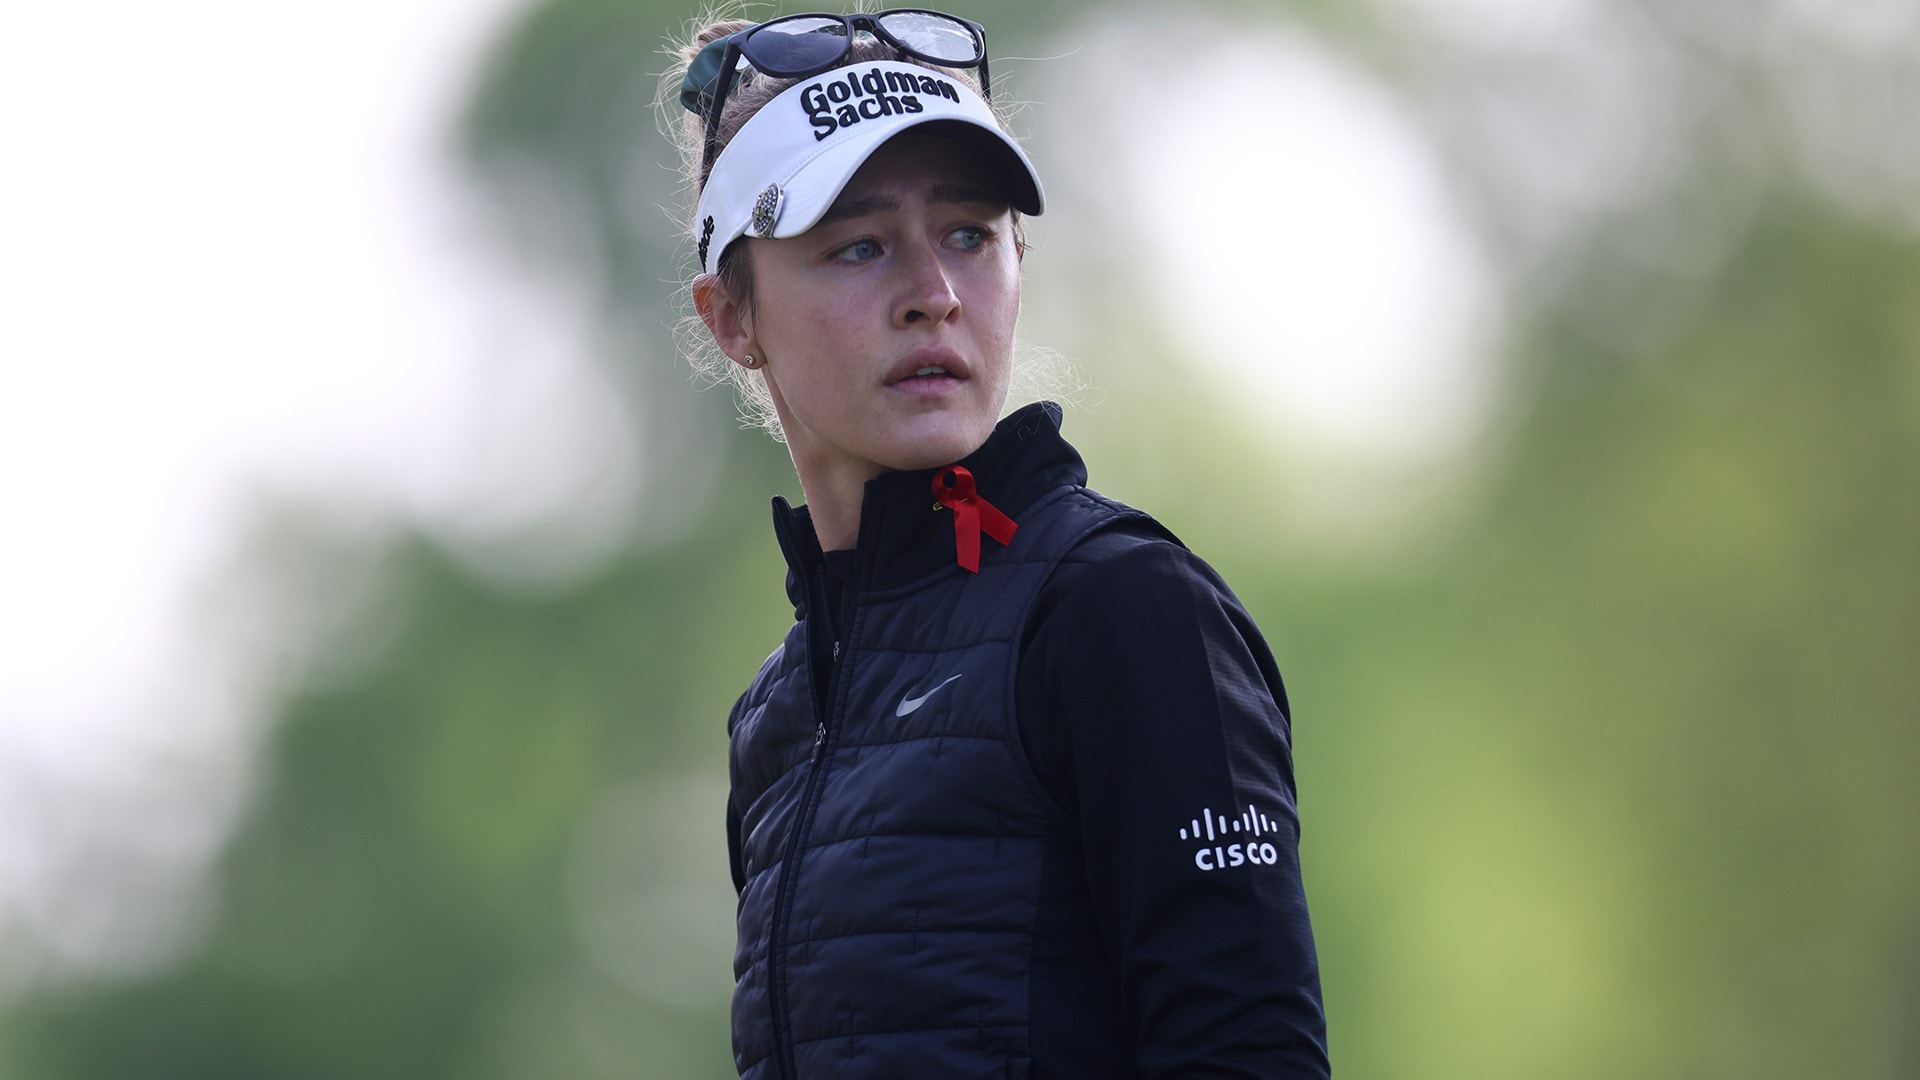 2023 U.S. Women’s Open: Nelly Korda ready to rebound from KPMG missed cut; excited for Pebble Beach